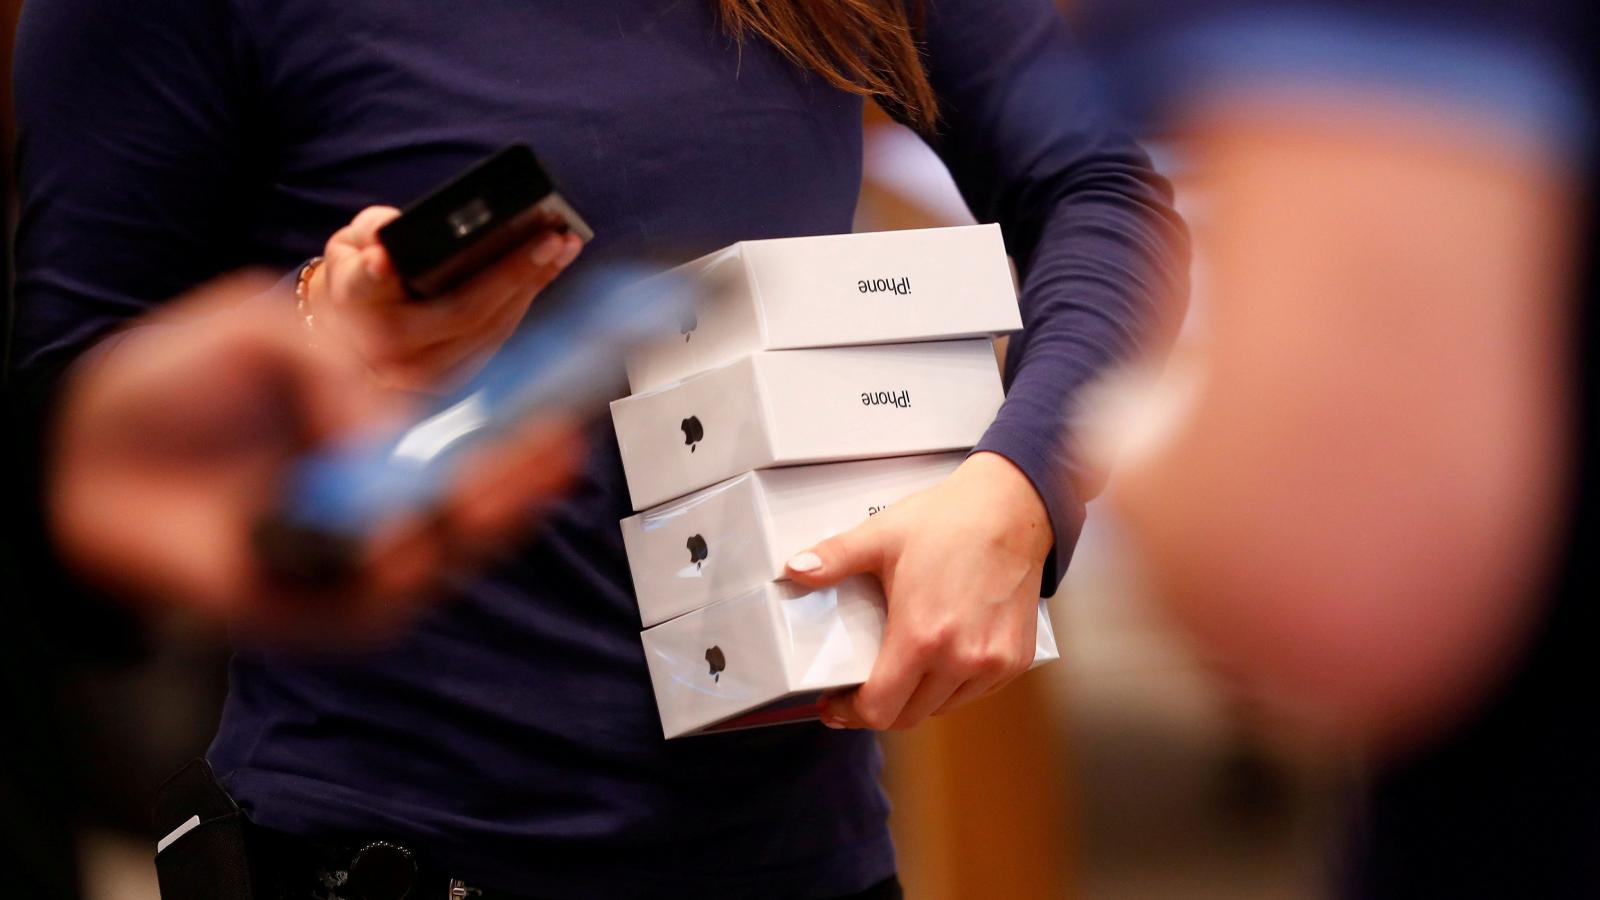 Apple is Pulling these iPhones from Stores in Germany